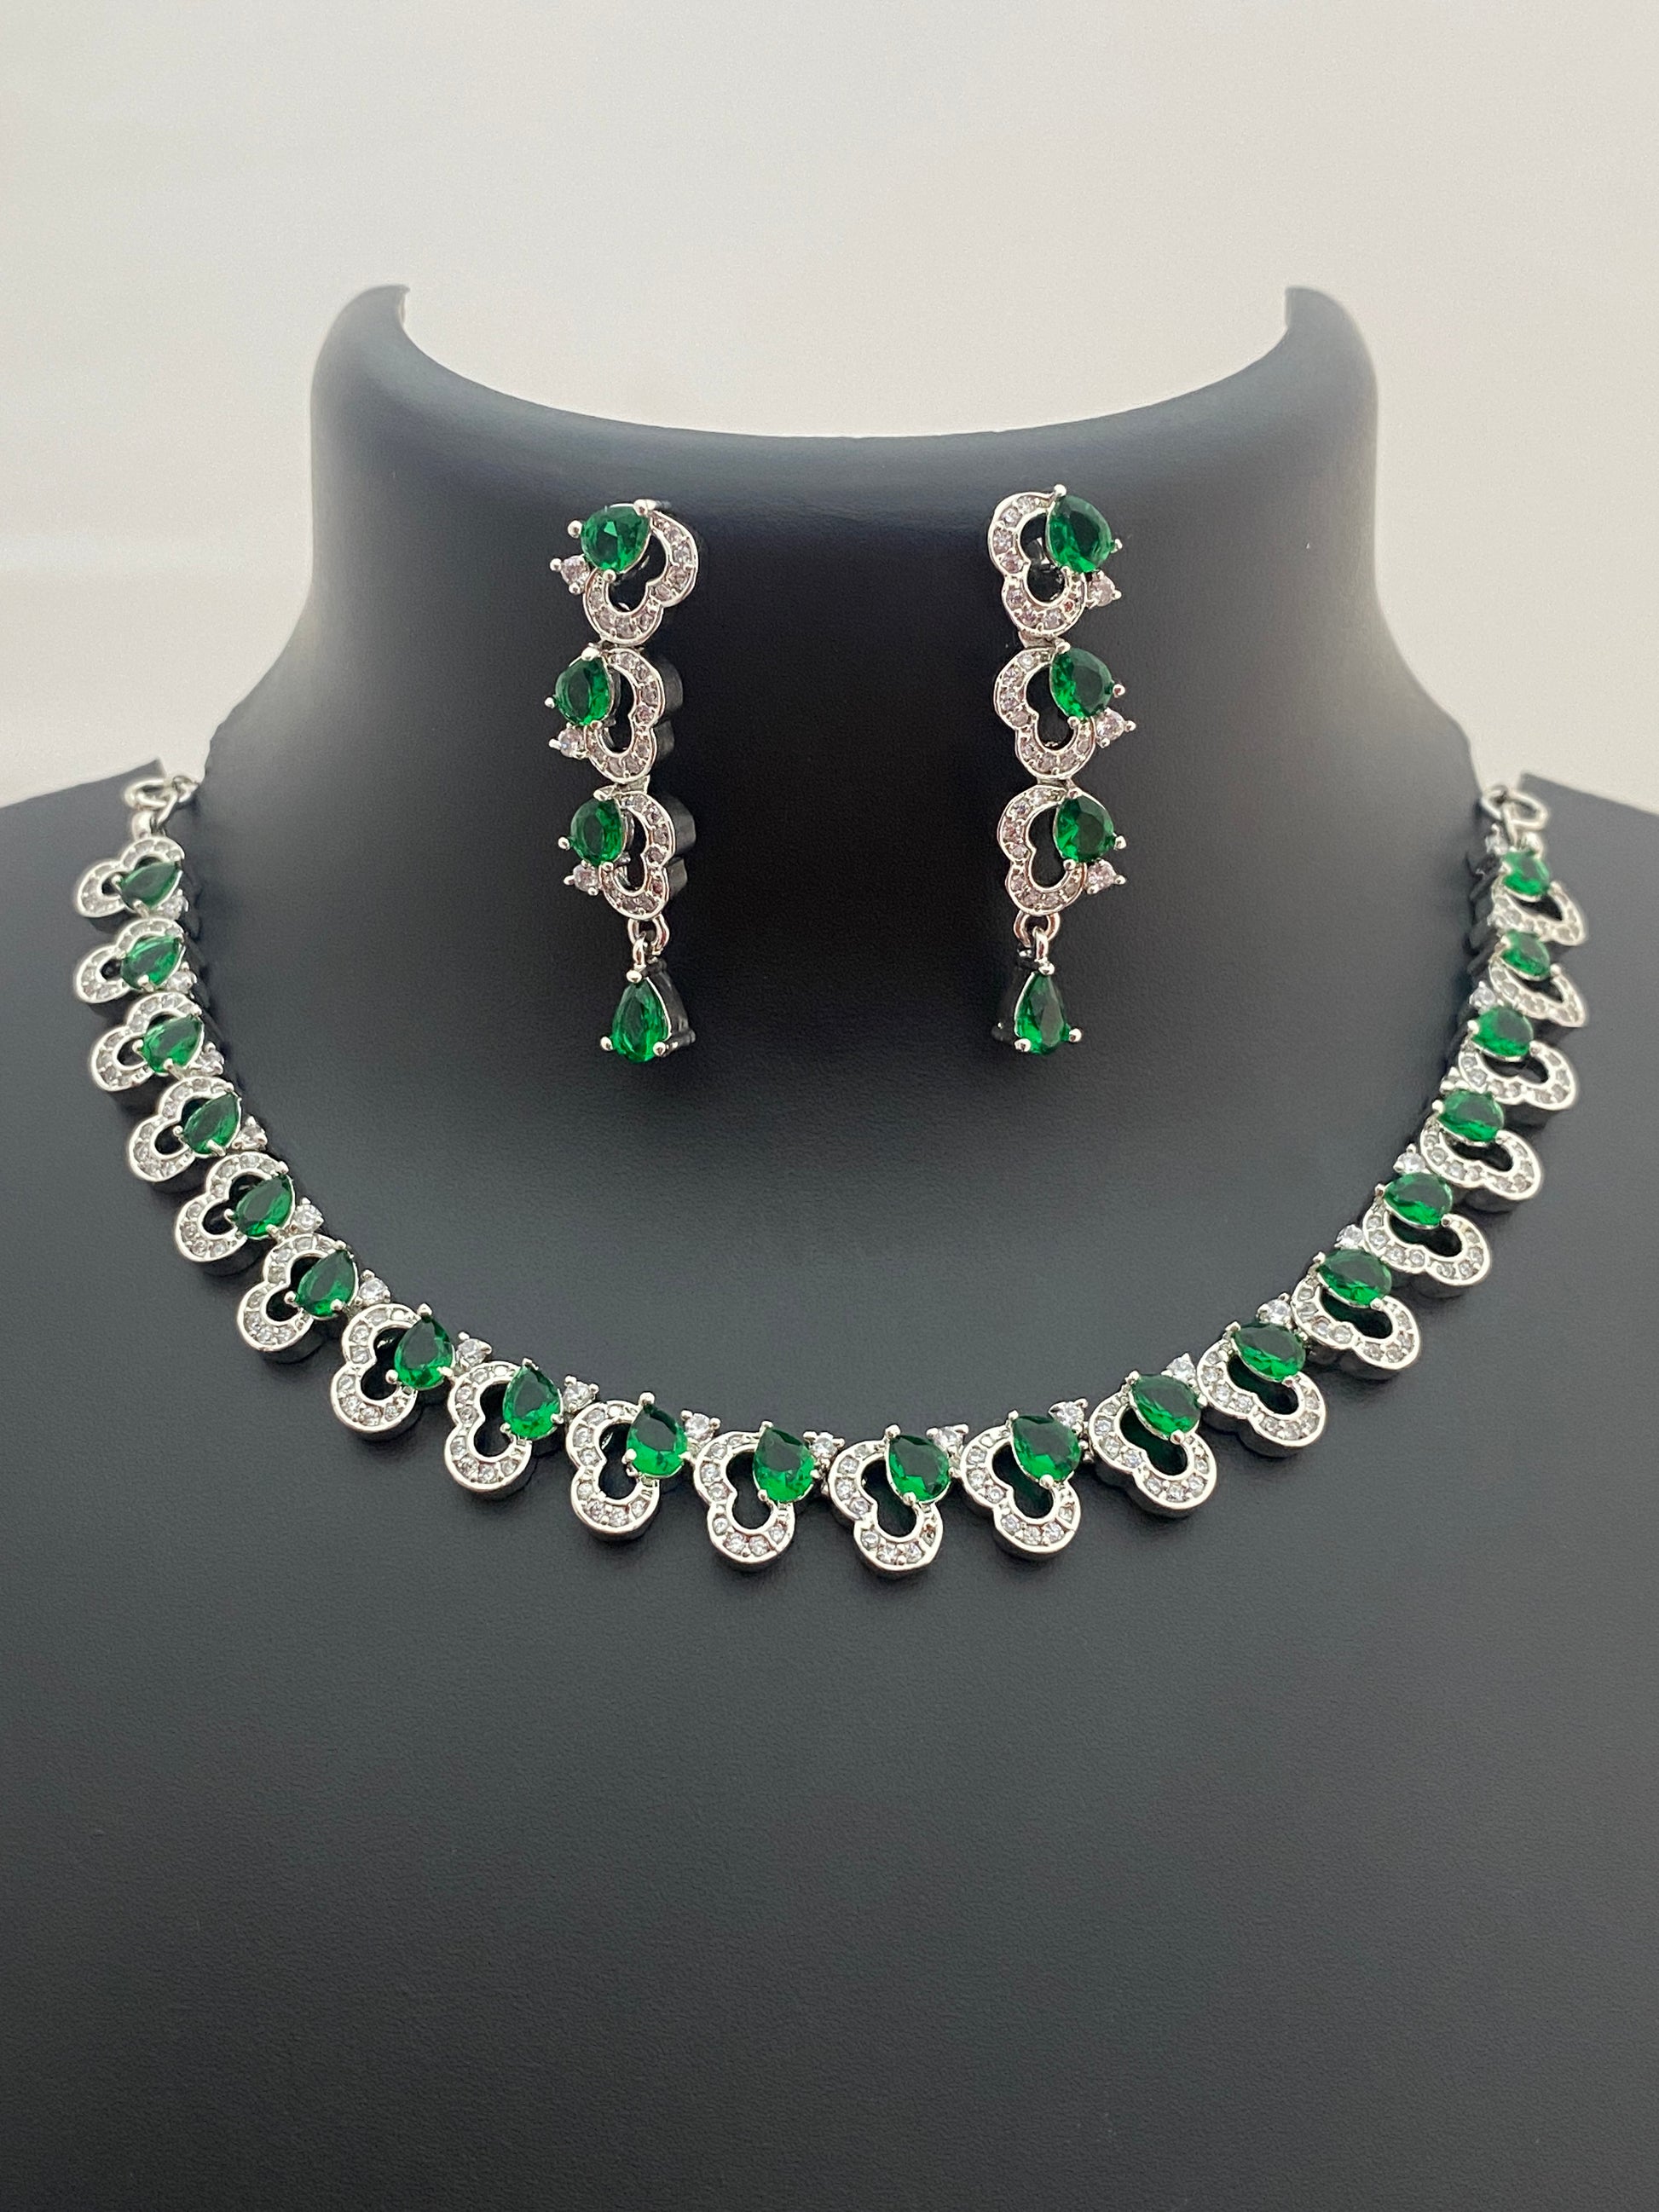 Charming Heart Designed American Diamond Necklace And Earrings With Green Color